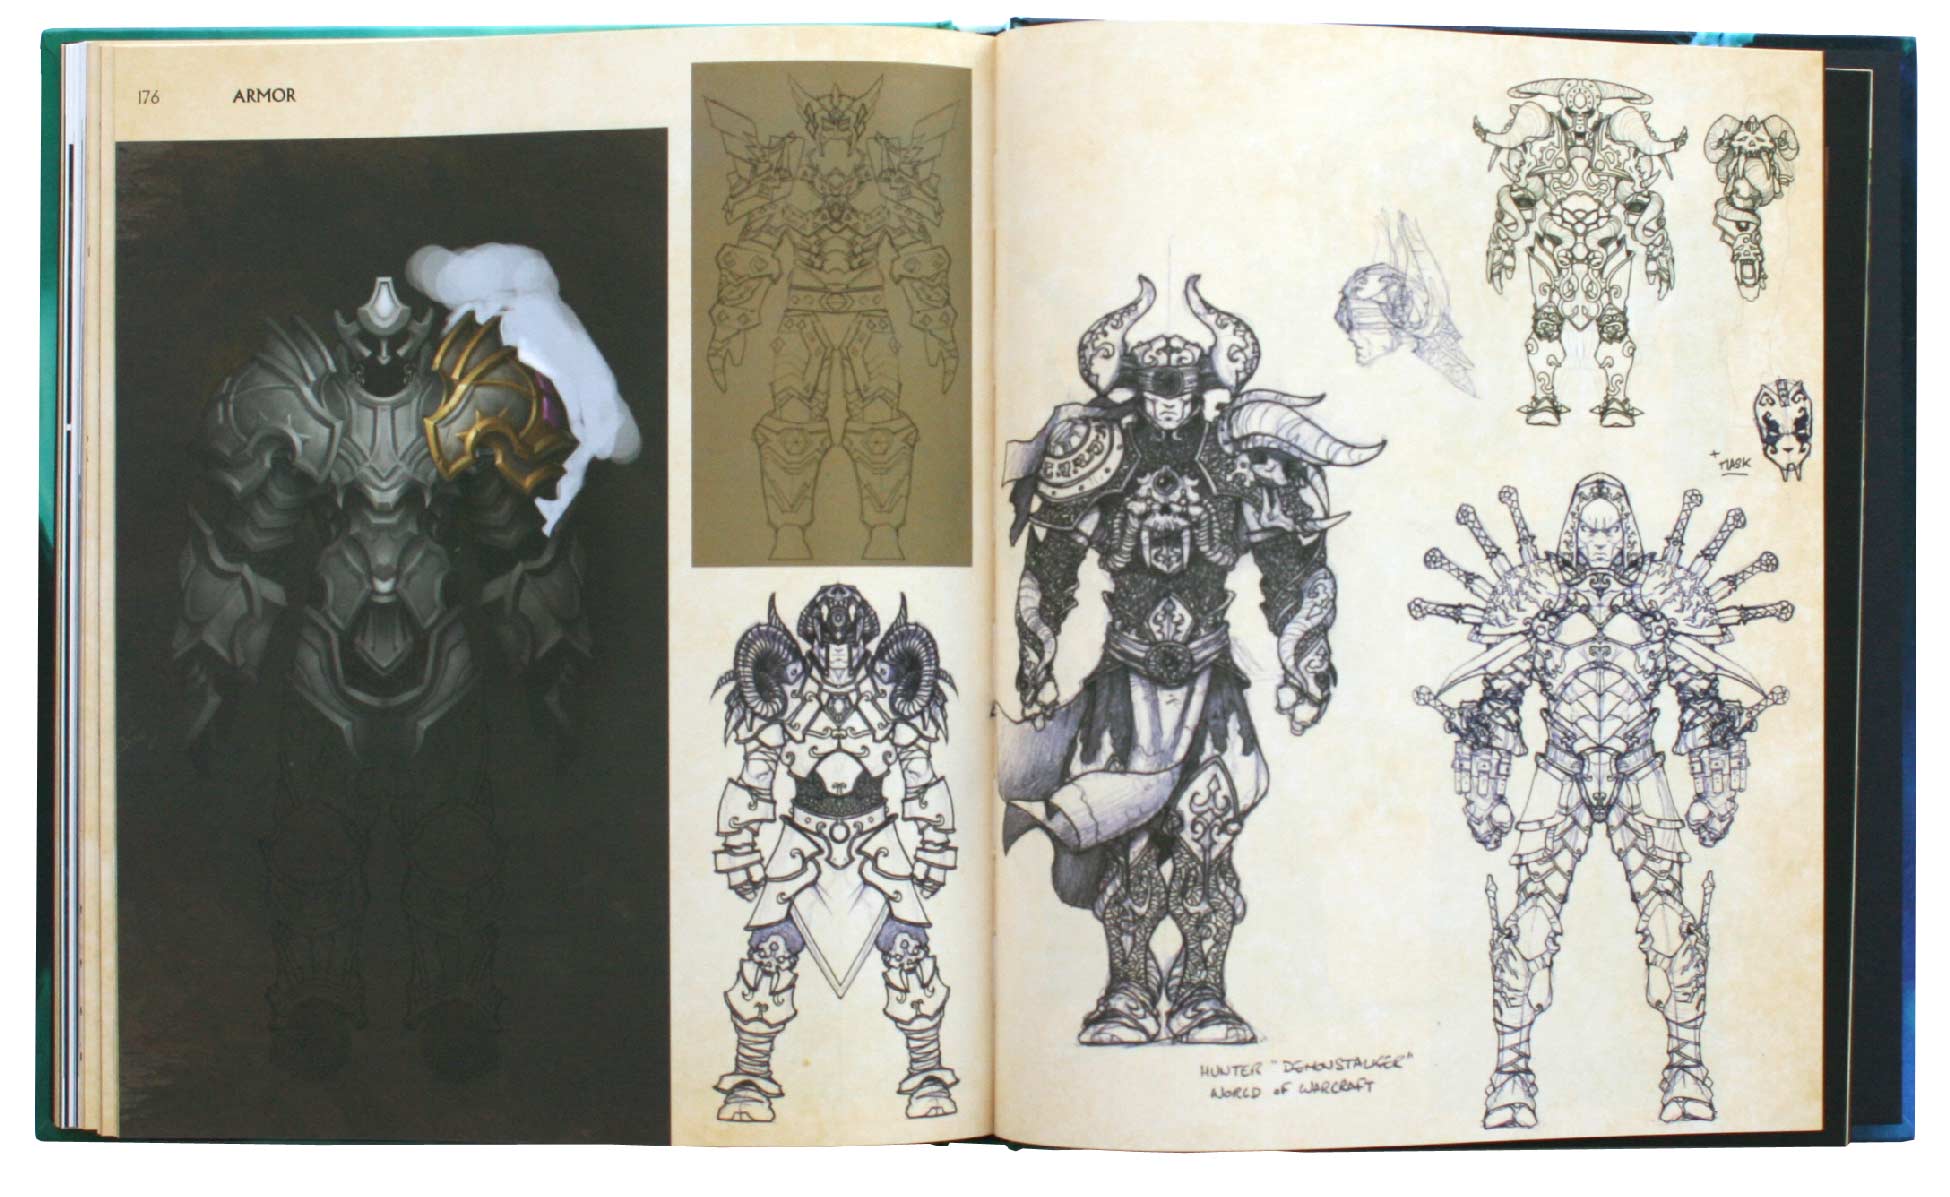 Page 176 et 177 de l'Art book : The Art of the Burning Crusade (World of Warcraft)